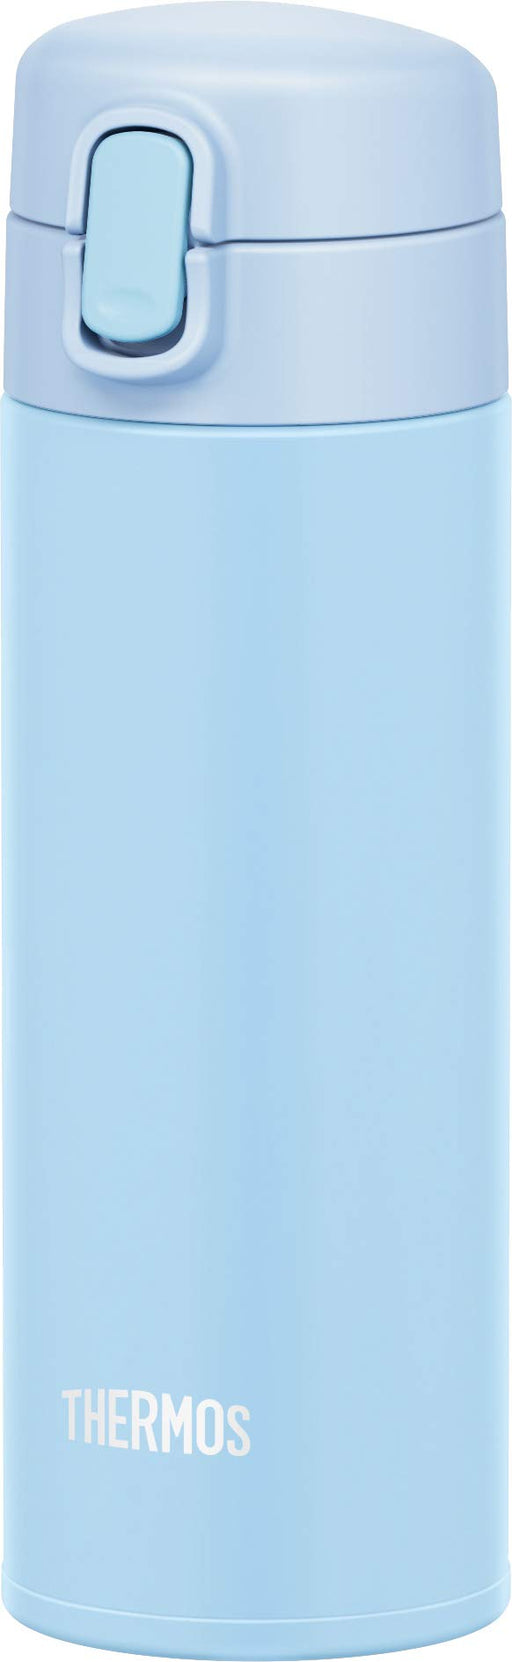 Thermos Water Bottle Vacuum Insulated Straw Bottle 350ml Light Blue FJM-350 LB_1